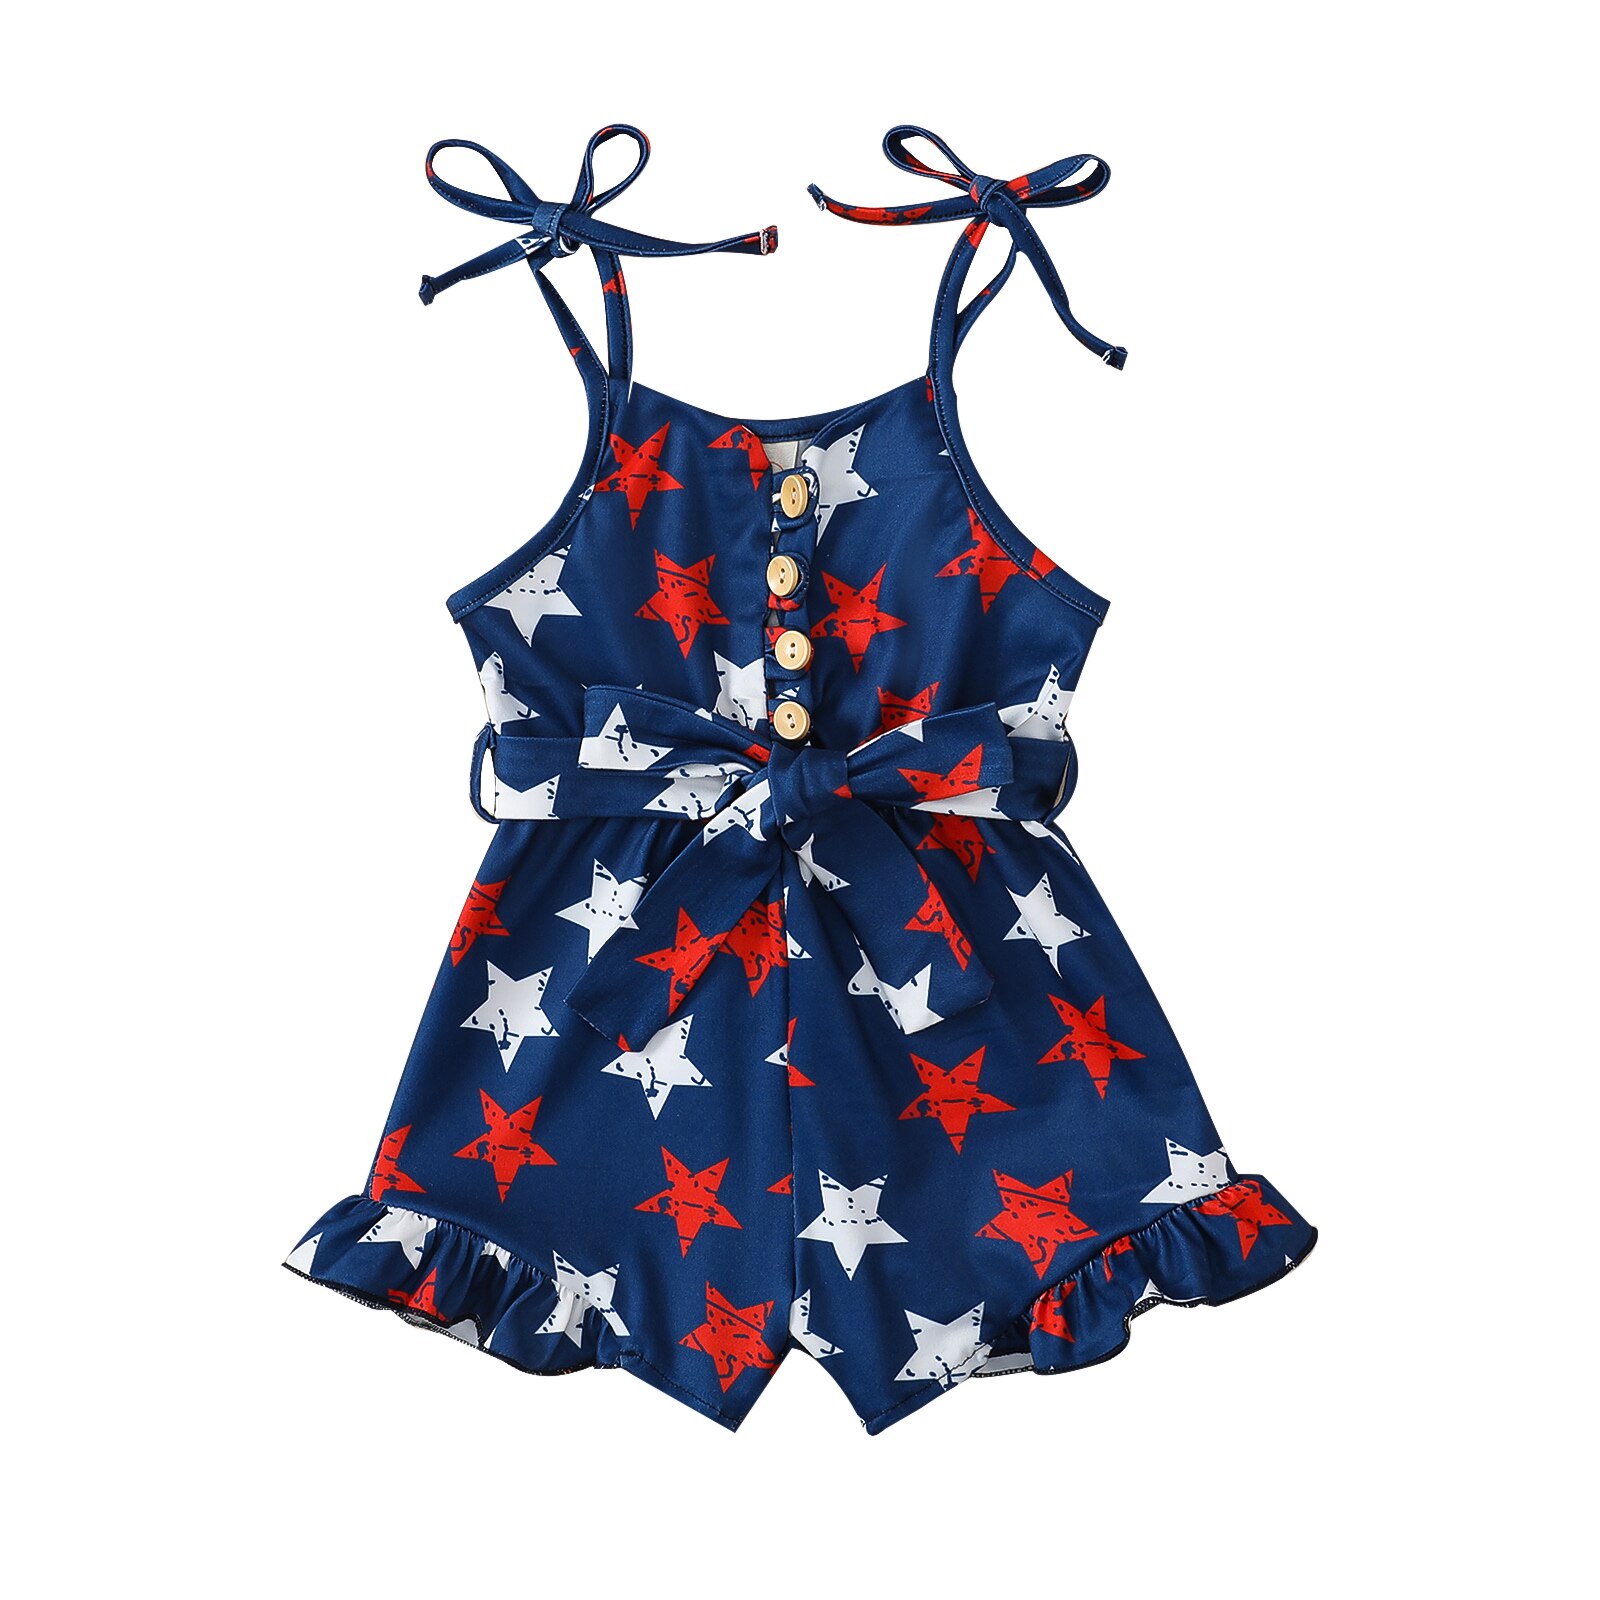 Citgeett-Summer-Independence-Day-Kids-Girl-Jumpsuit-Shorts-Star-Print-Sleeveless-Rompers-Playsuit-Belt-Clothes-5